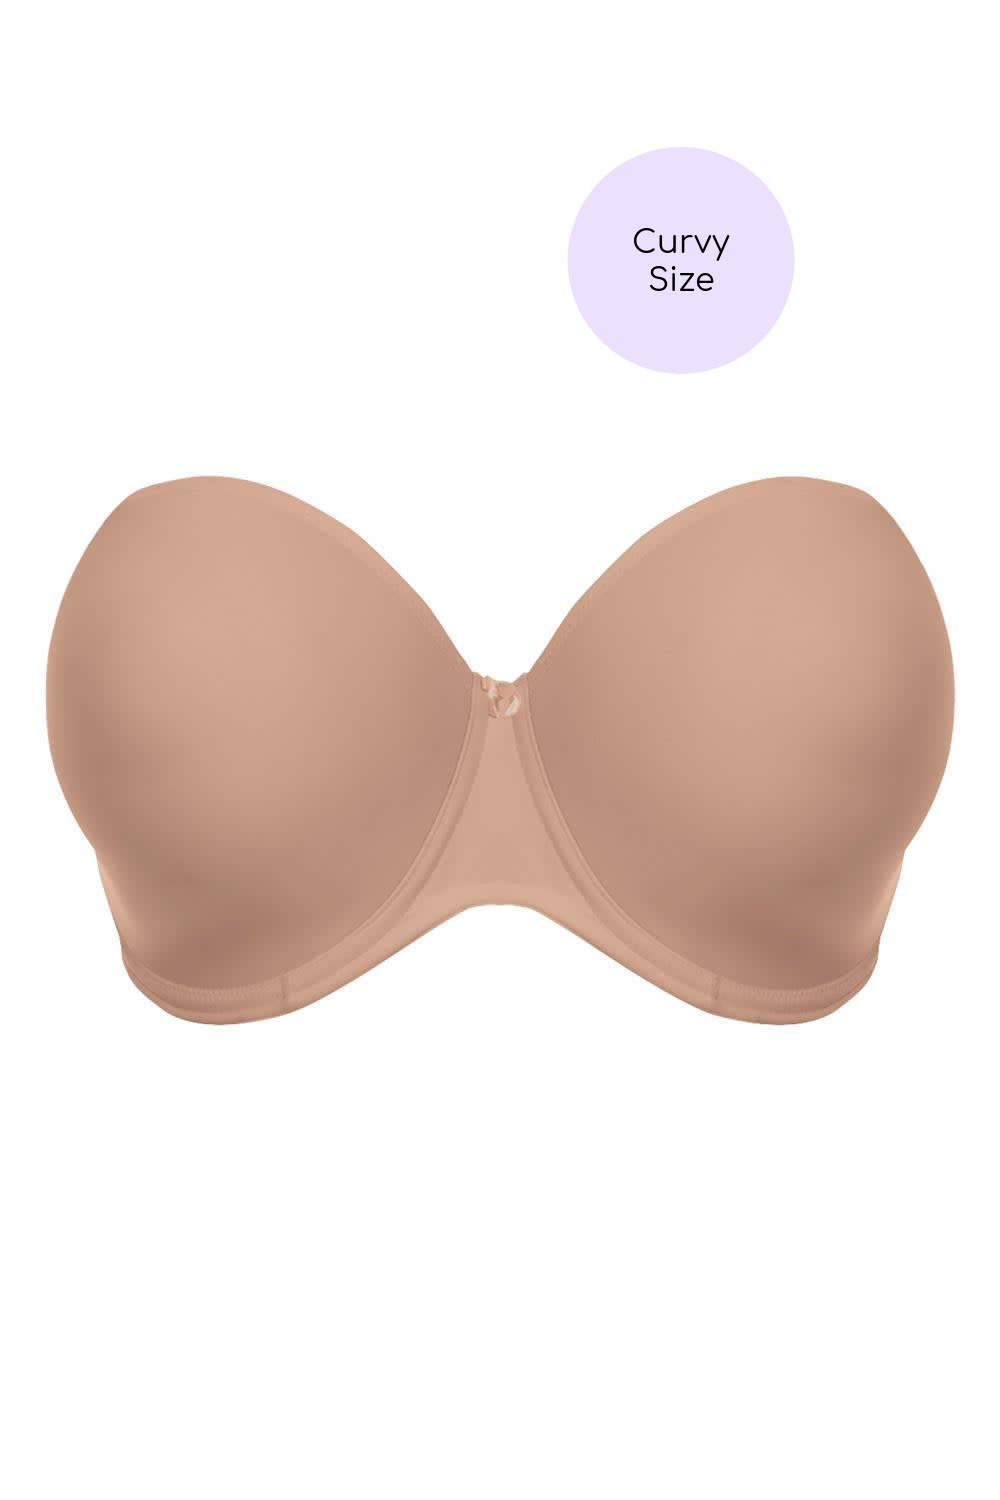 New ELOMI 4300 SAH Smooth Underwire Convertible Strapless Bra Size 44H